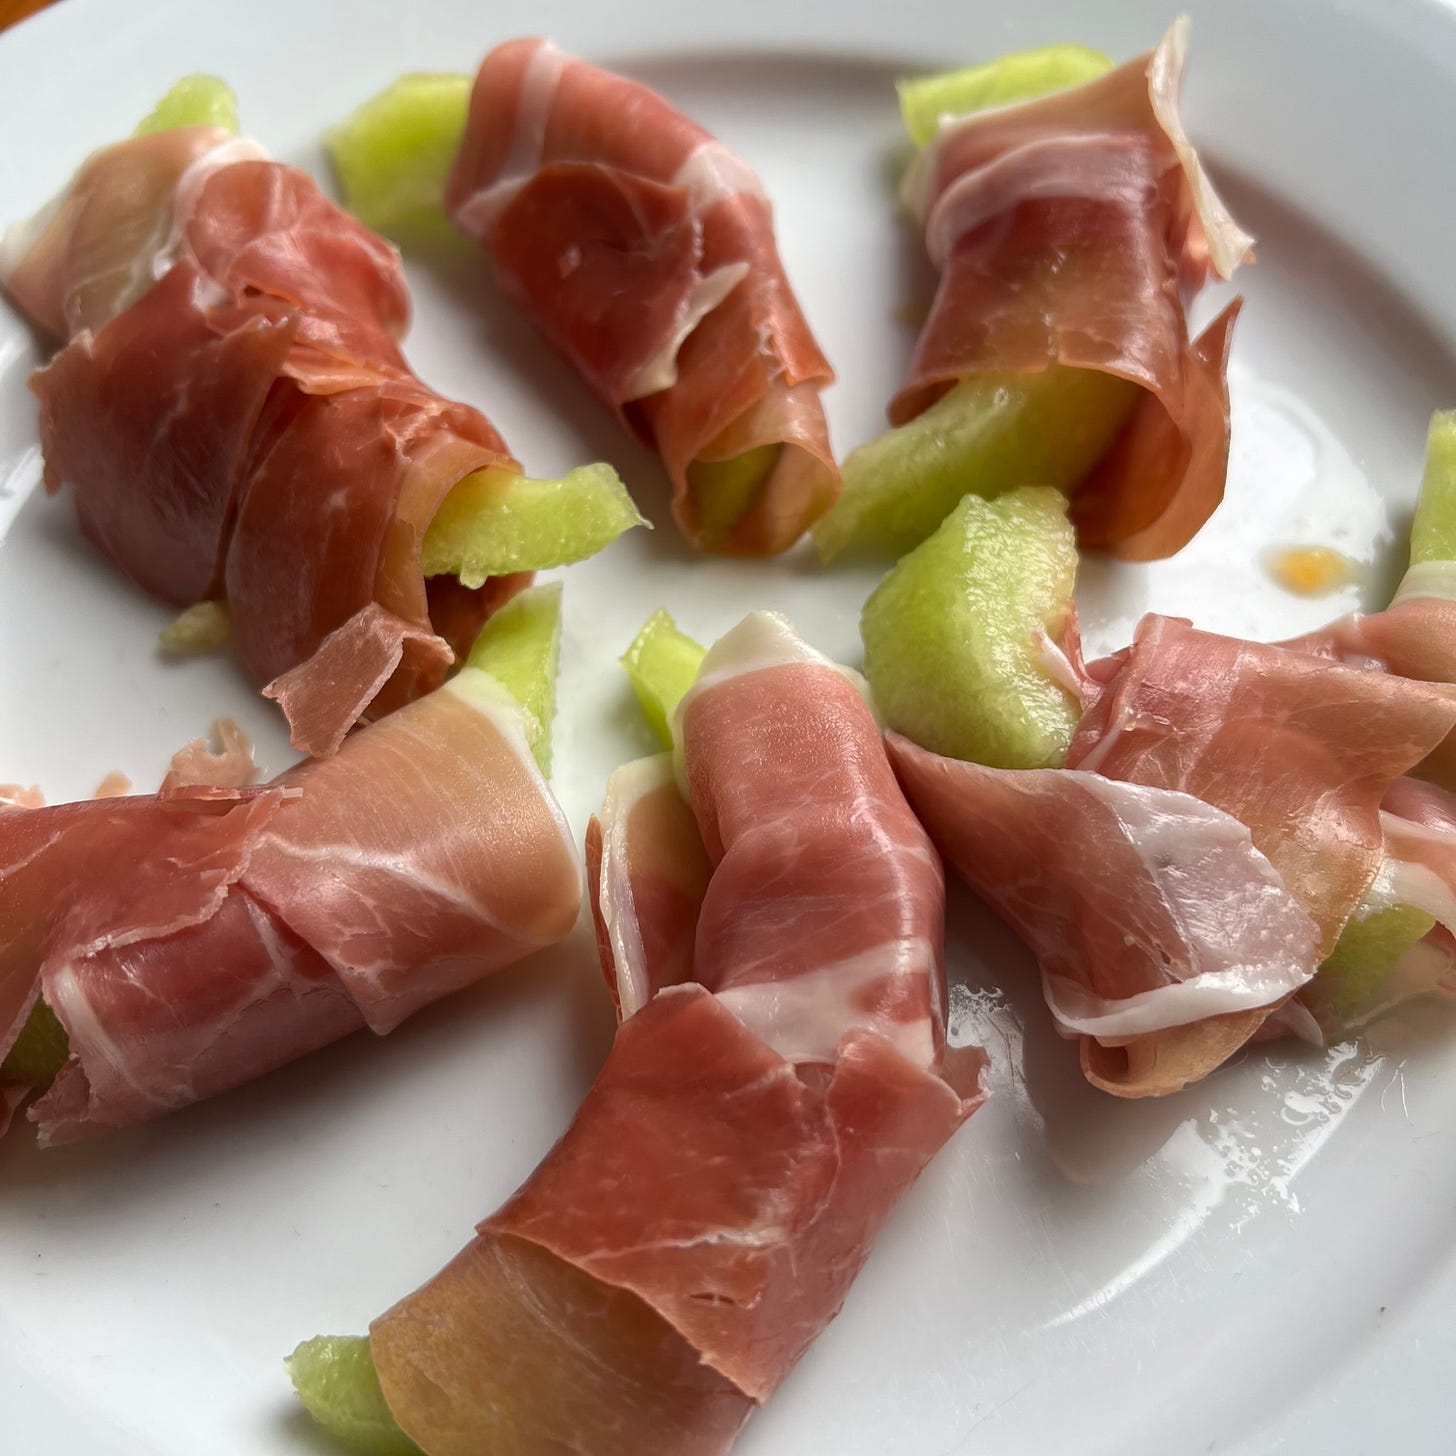 Pink Parma ham slices wrapped around slices of green honey dew melon on a white plate